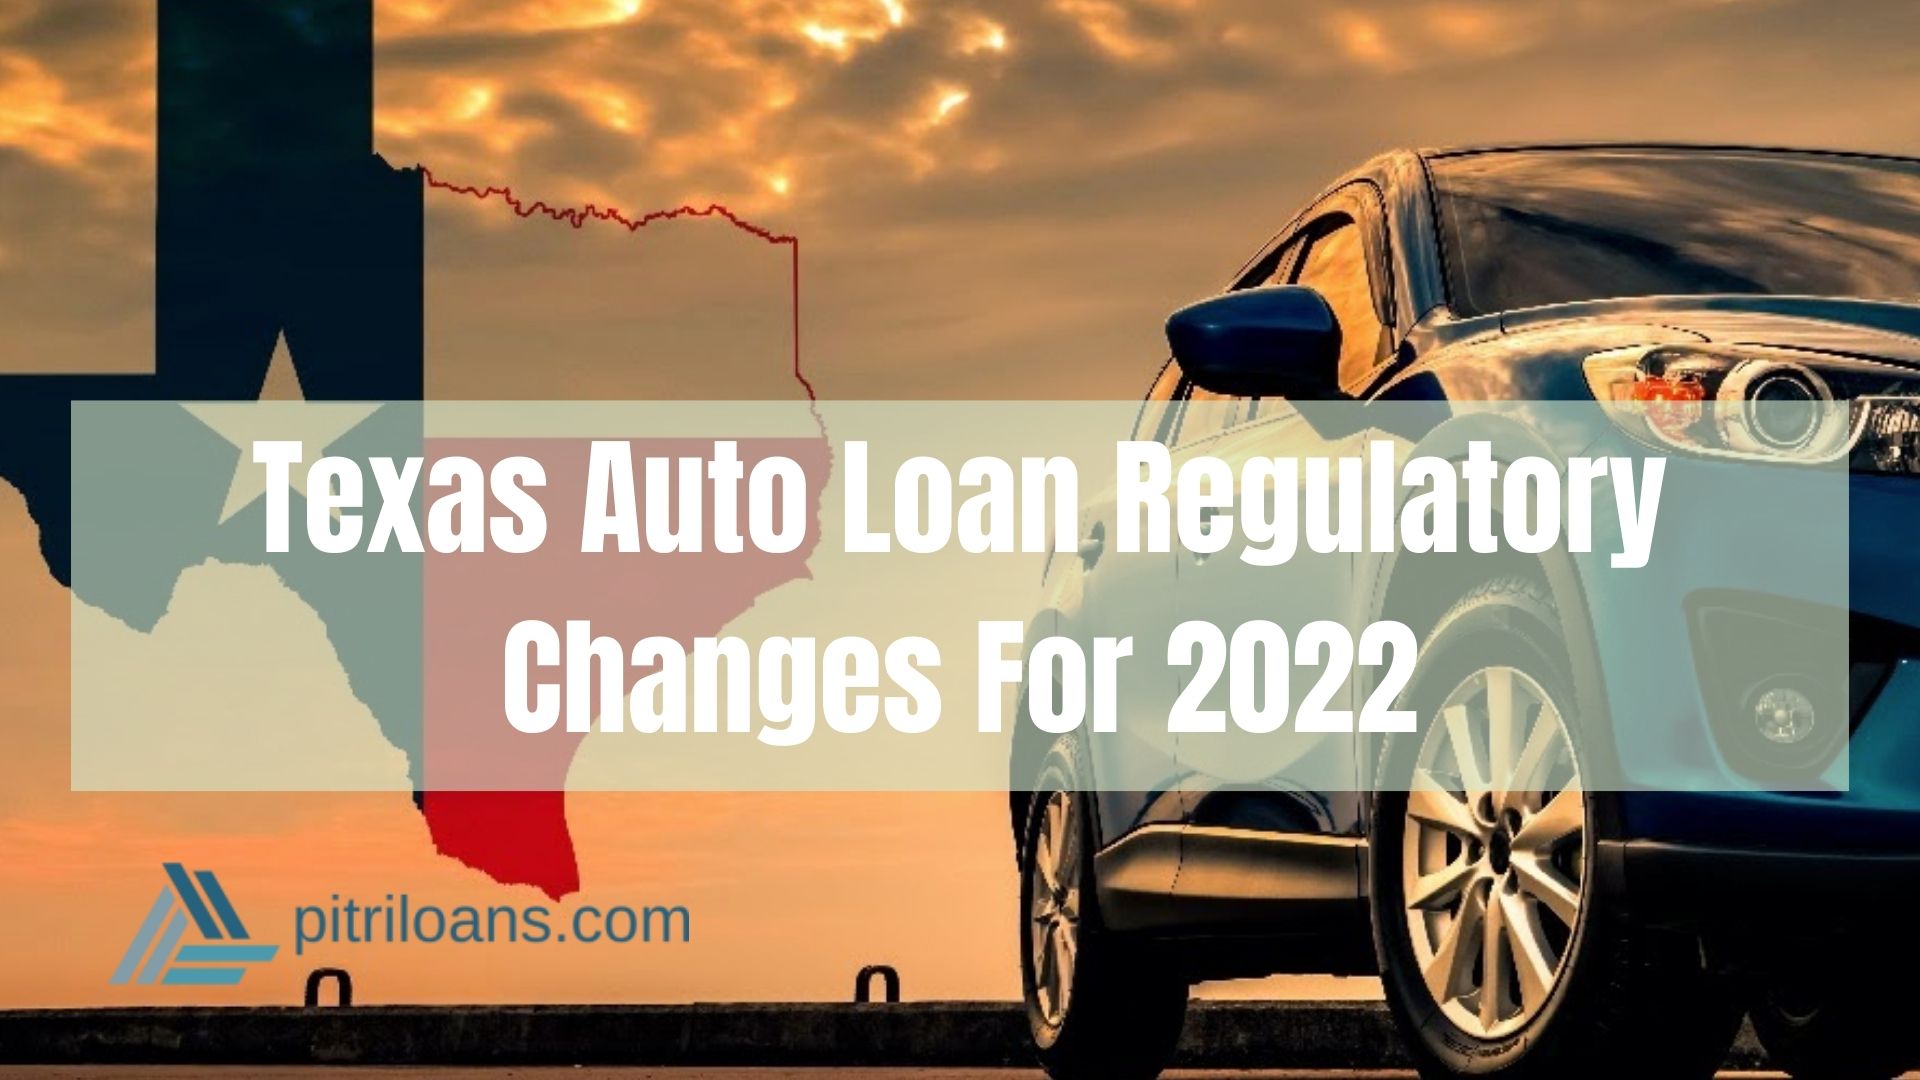 Texas Auto Loan Regulatory Changes For 2022